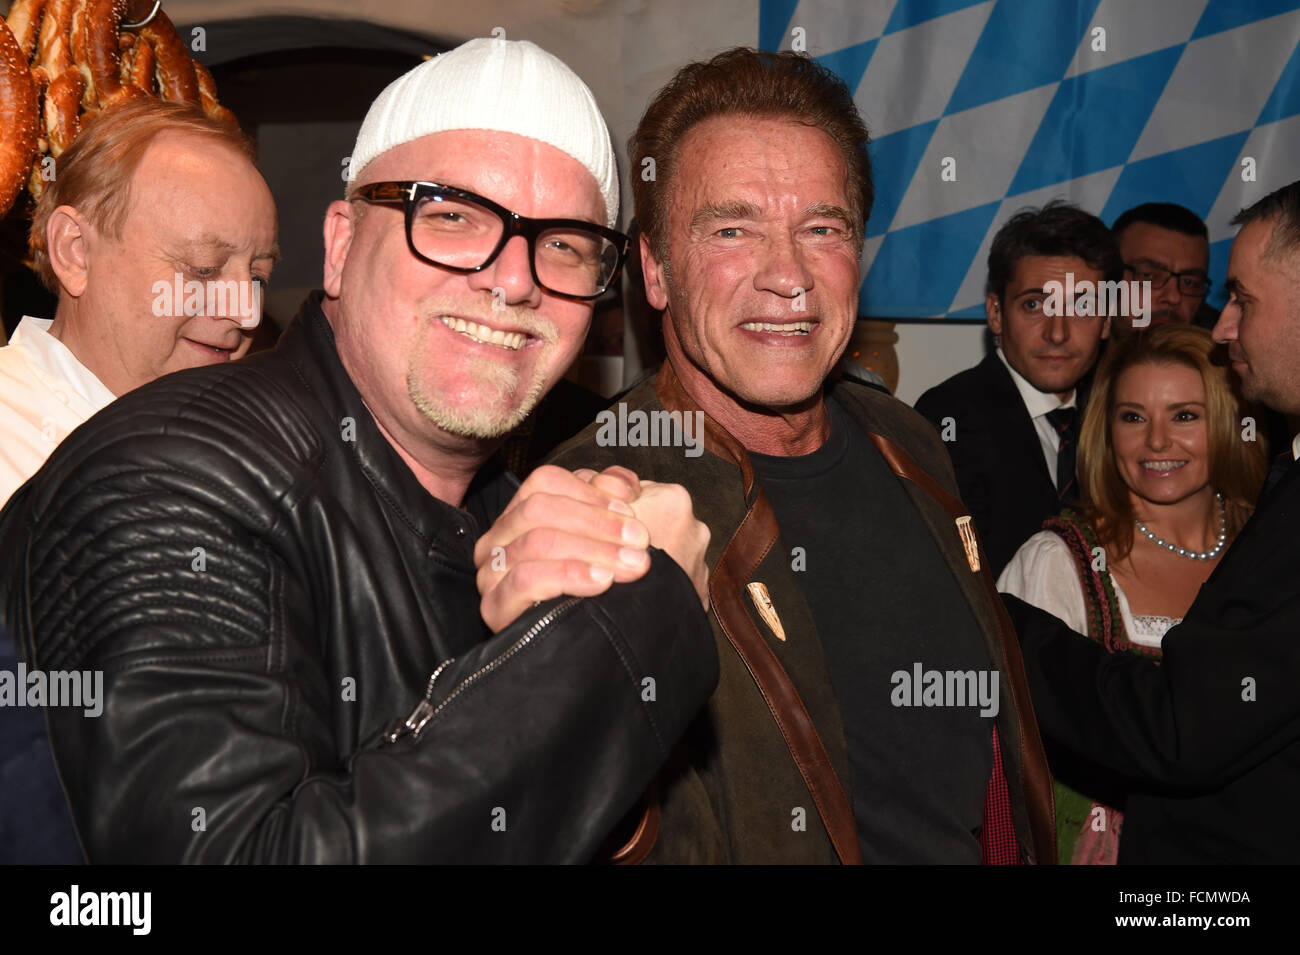 Actor Arnold Schwarzenegger (r) and DJ Oetzi, Gerry Friedle, posing at the 25th Weisswurst party at Stanglwirt hotel in Going, Austria, 22 January 2016. Photo: Felix Hoerhager/dpa Stock Photo